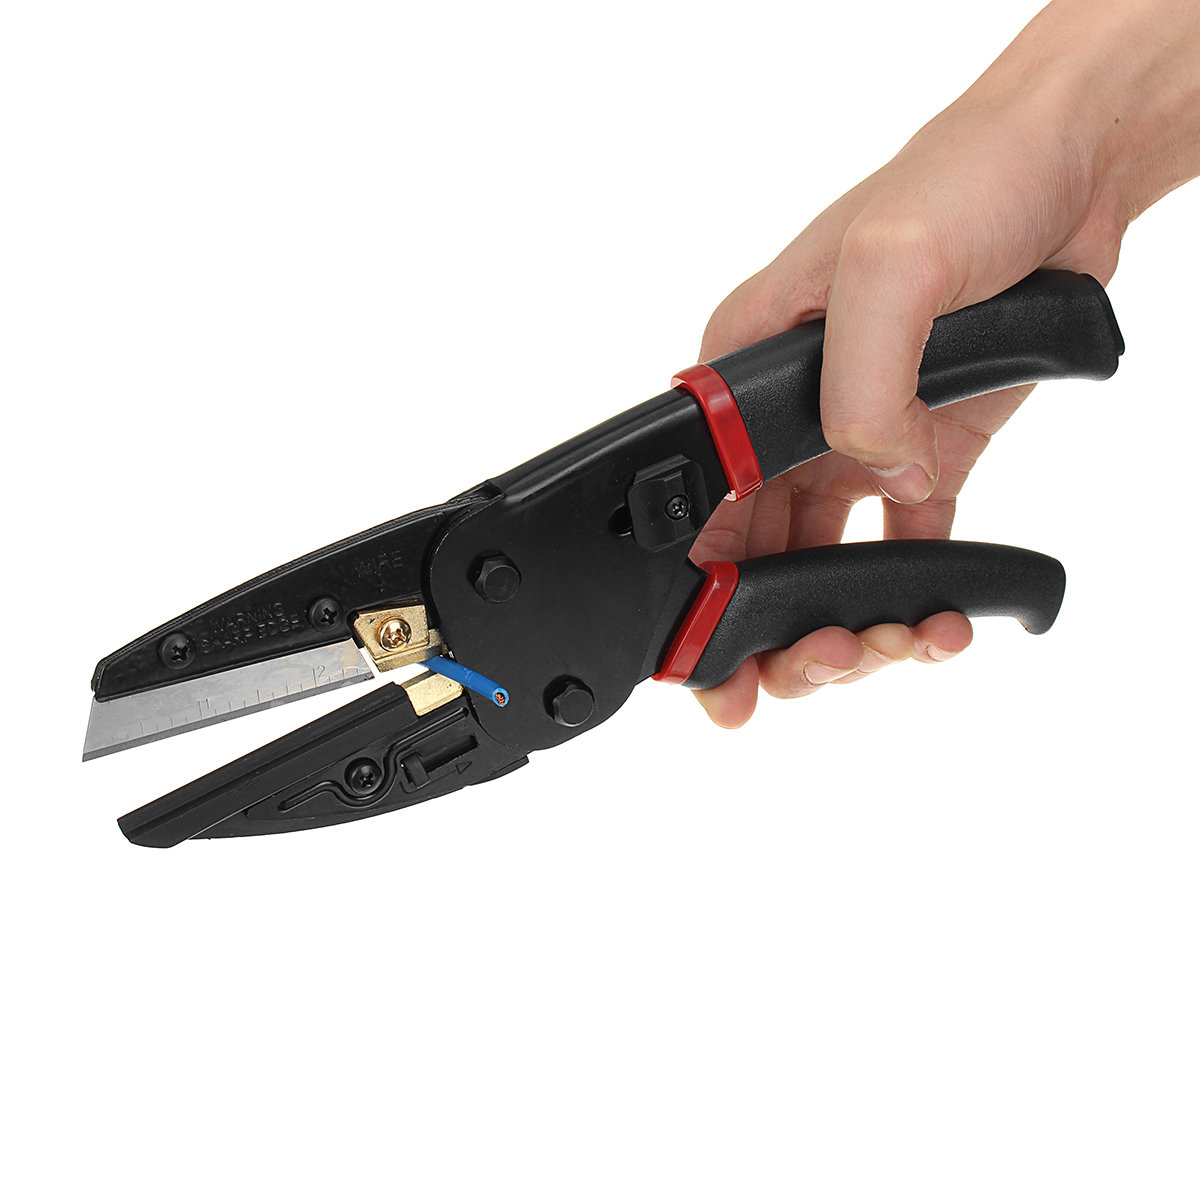 

Multi-Function 3 In 1 Pliers Power Cut Cutting Tool